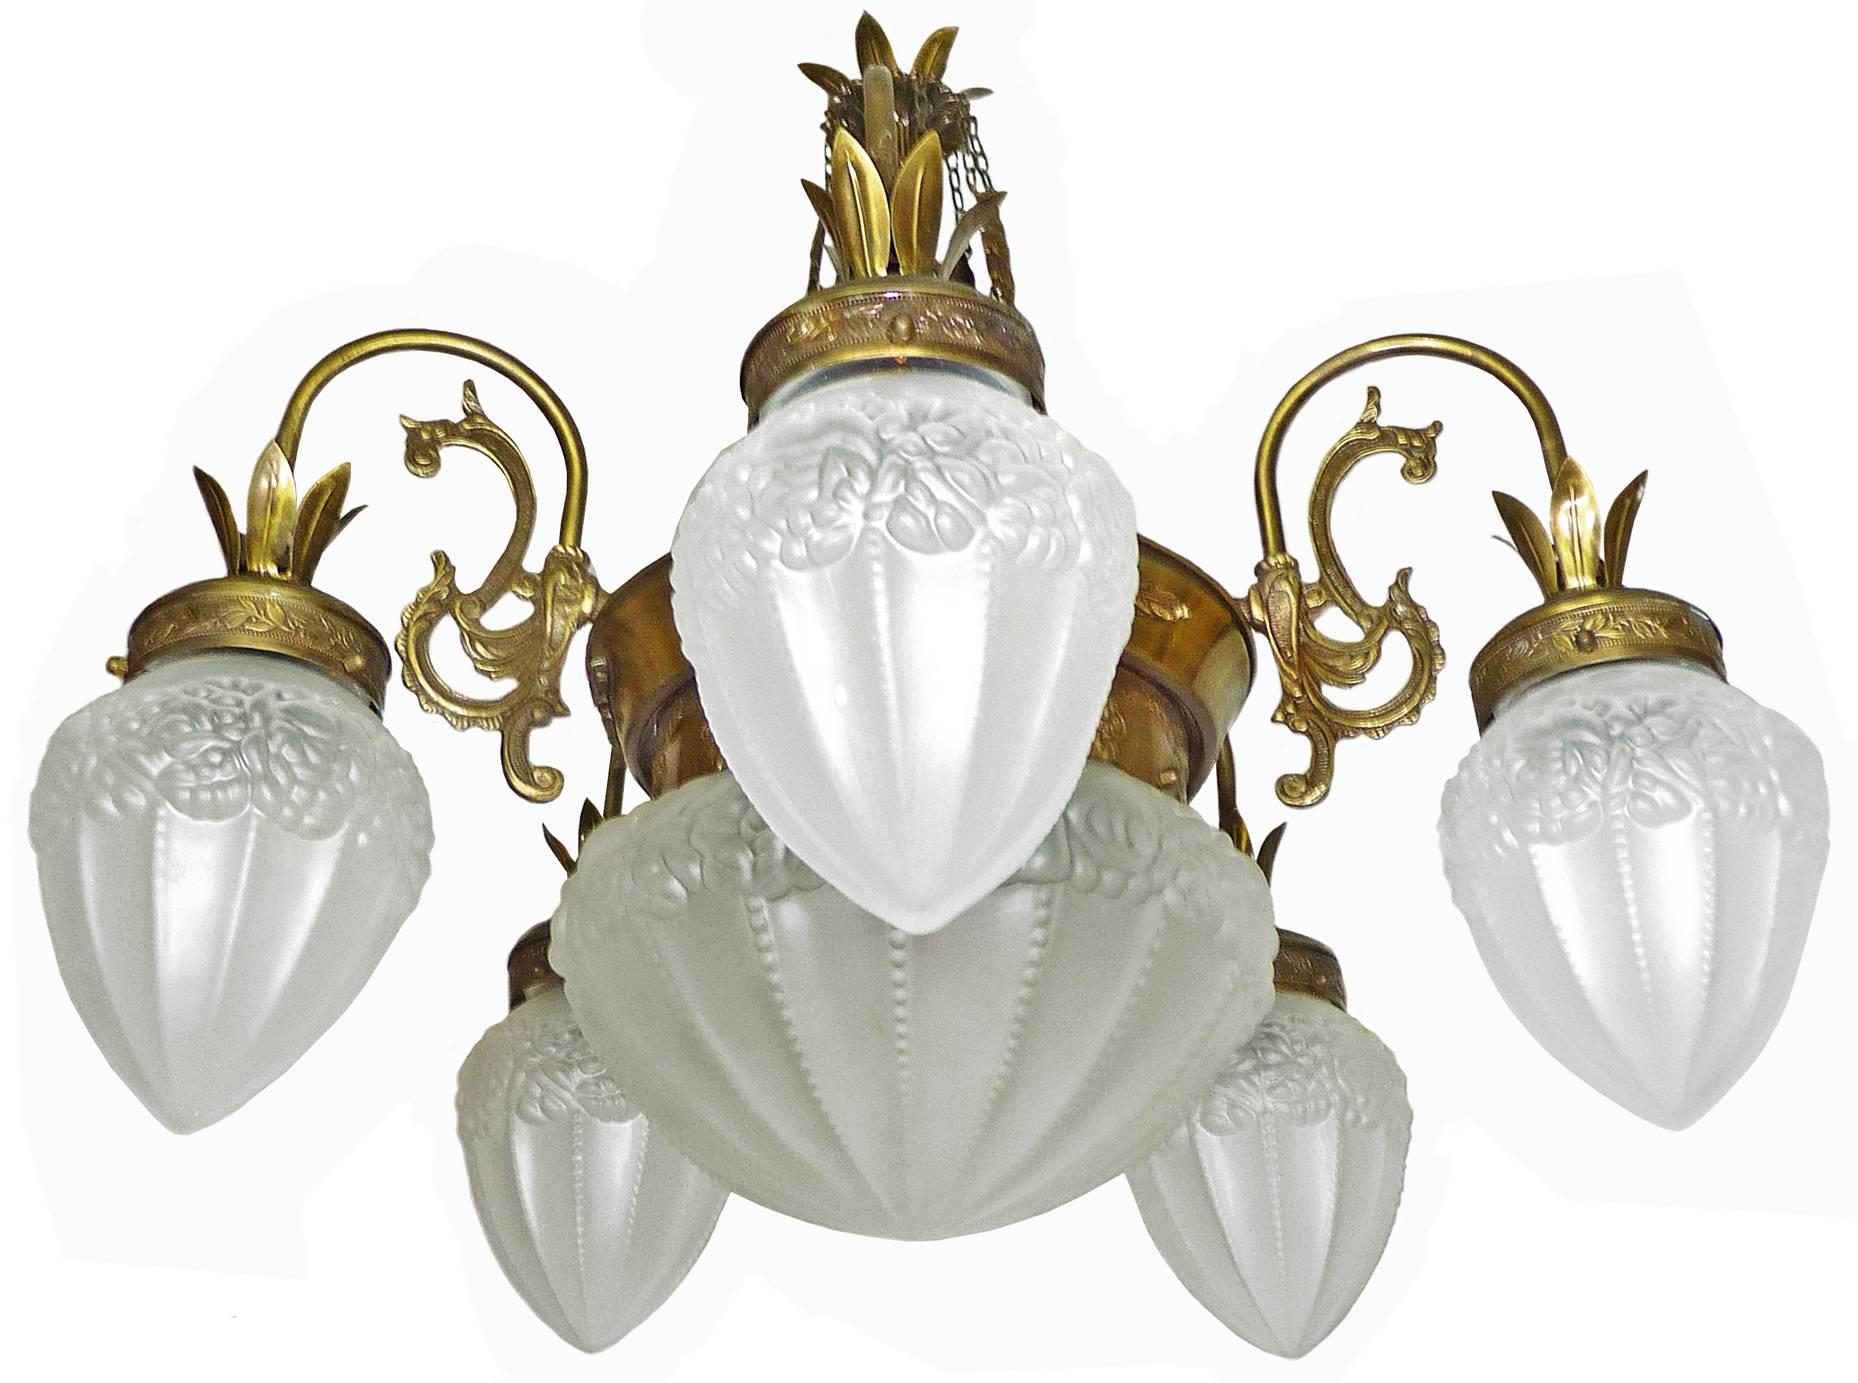 French Degué style Art Deco white frosted glass, six-light brass chandelier/ gold and bronze color with patina.
Six bulbs (five bulbs E14 40W + one bulb E27 60W)
Good working condition / European rewired
Measures: Diameter 28.5 in / 72 cm
Height